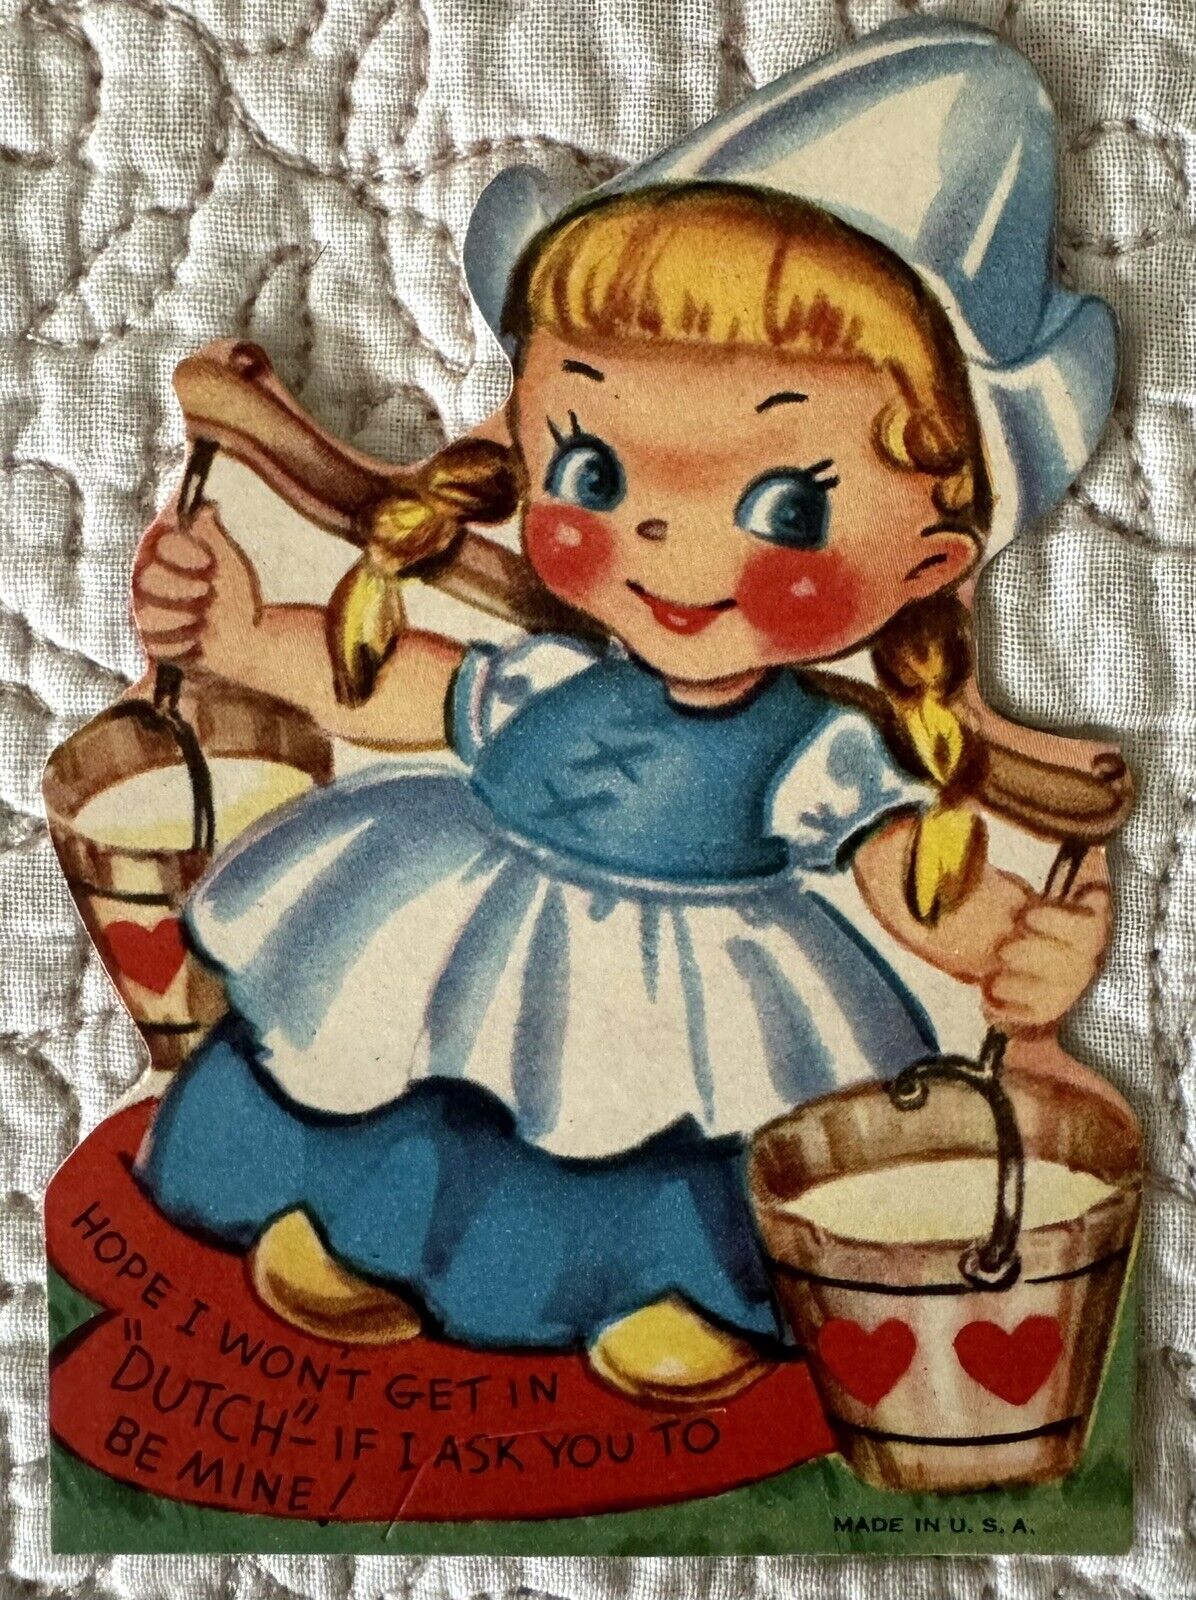 Unused Valentine Girl Dutch Pail Water Carry Vintage Greeting Card 1930s 1940s